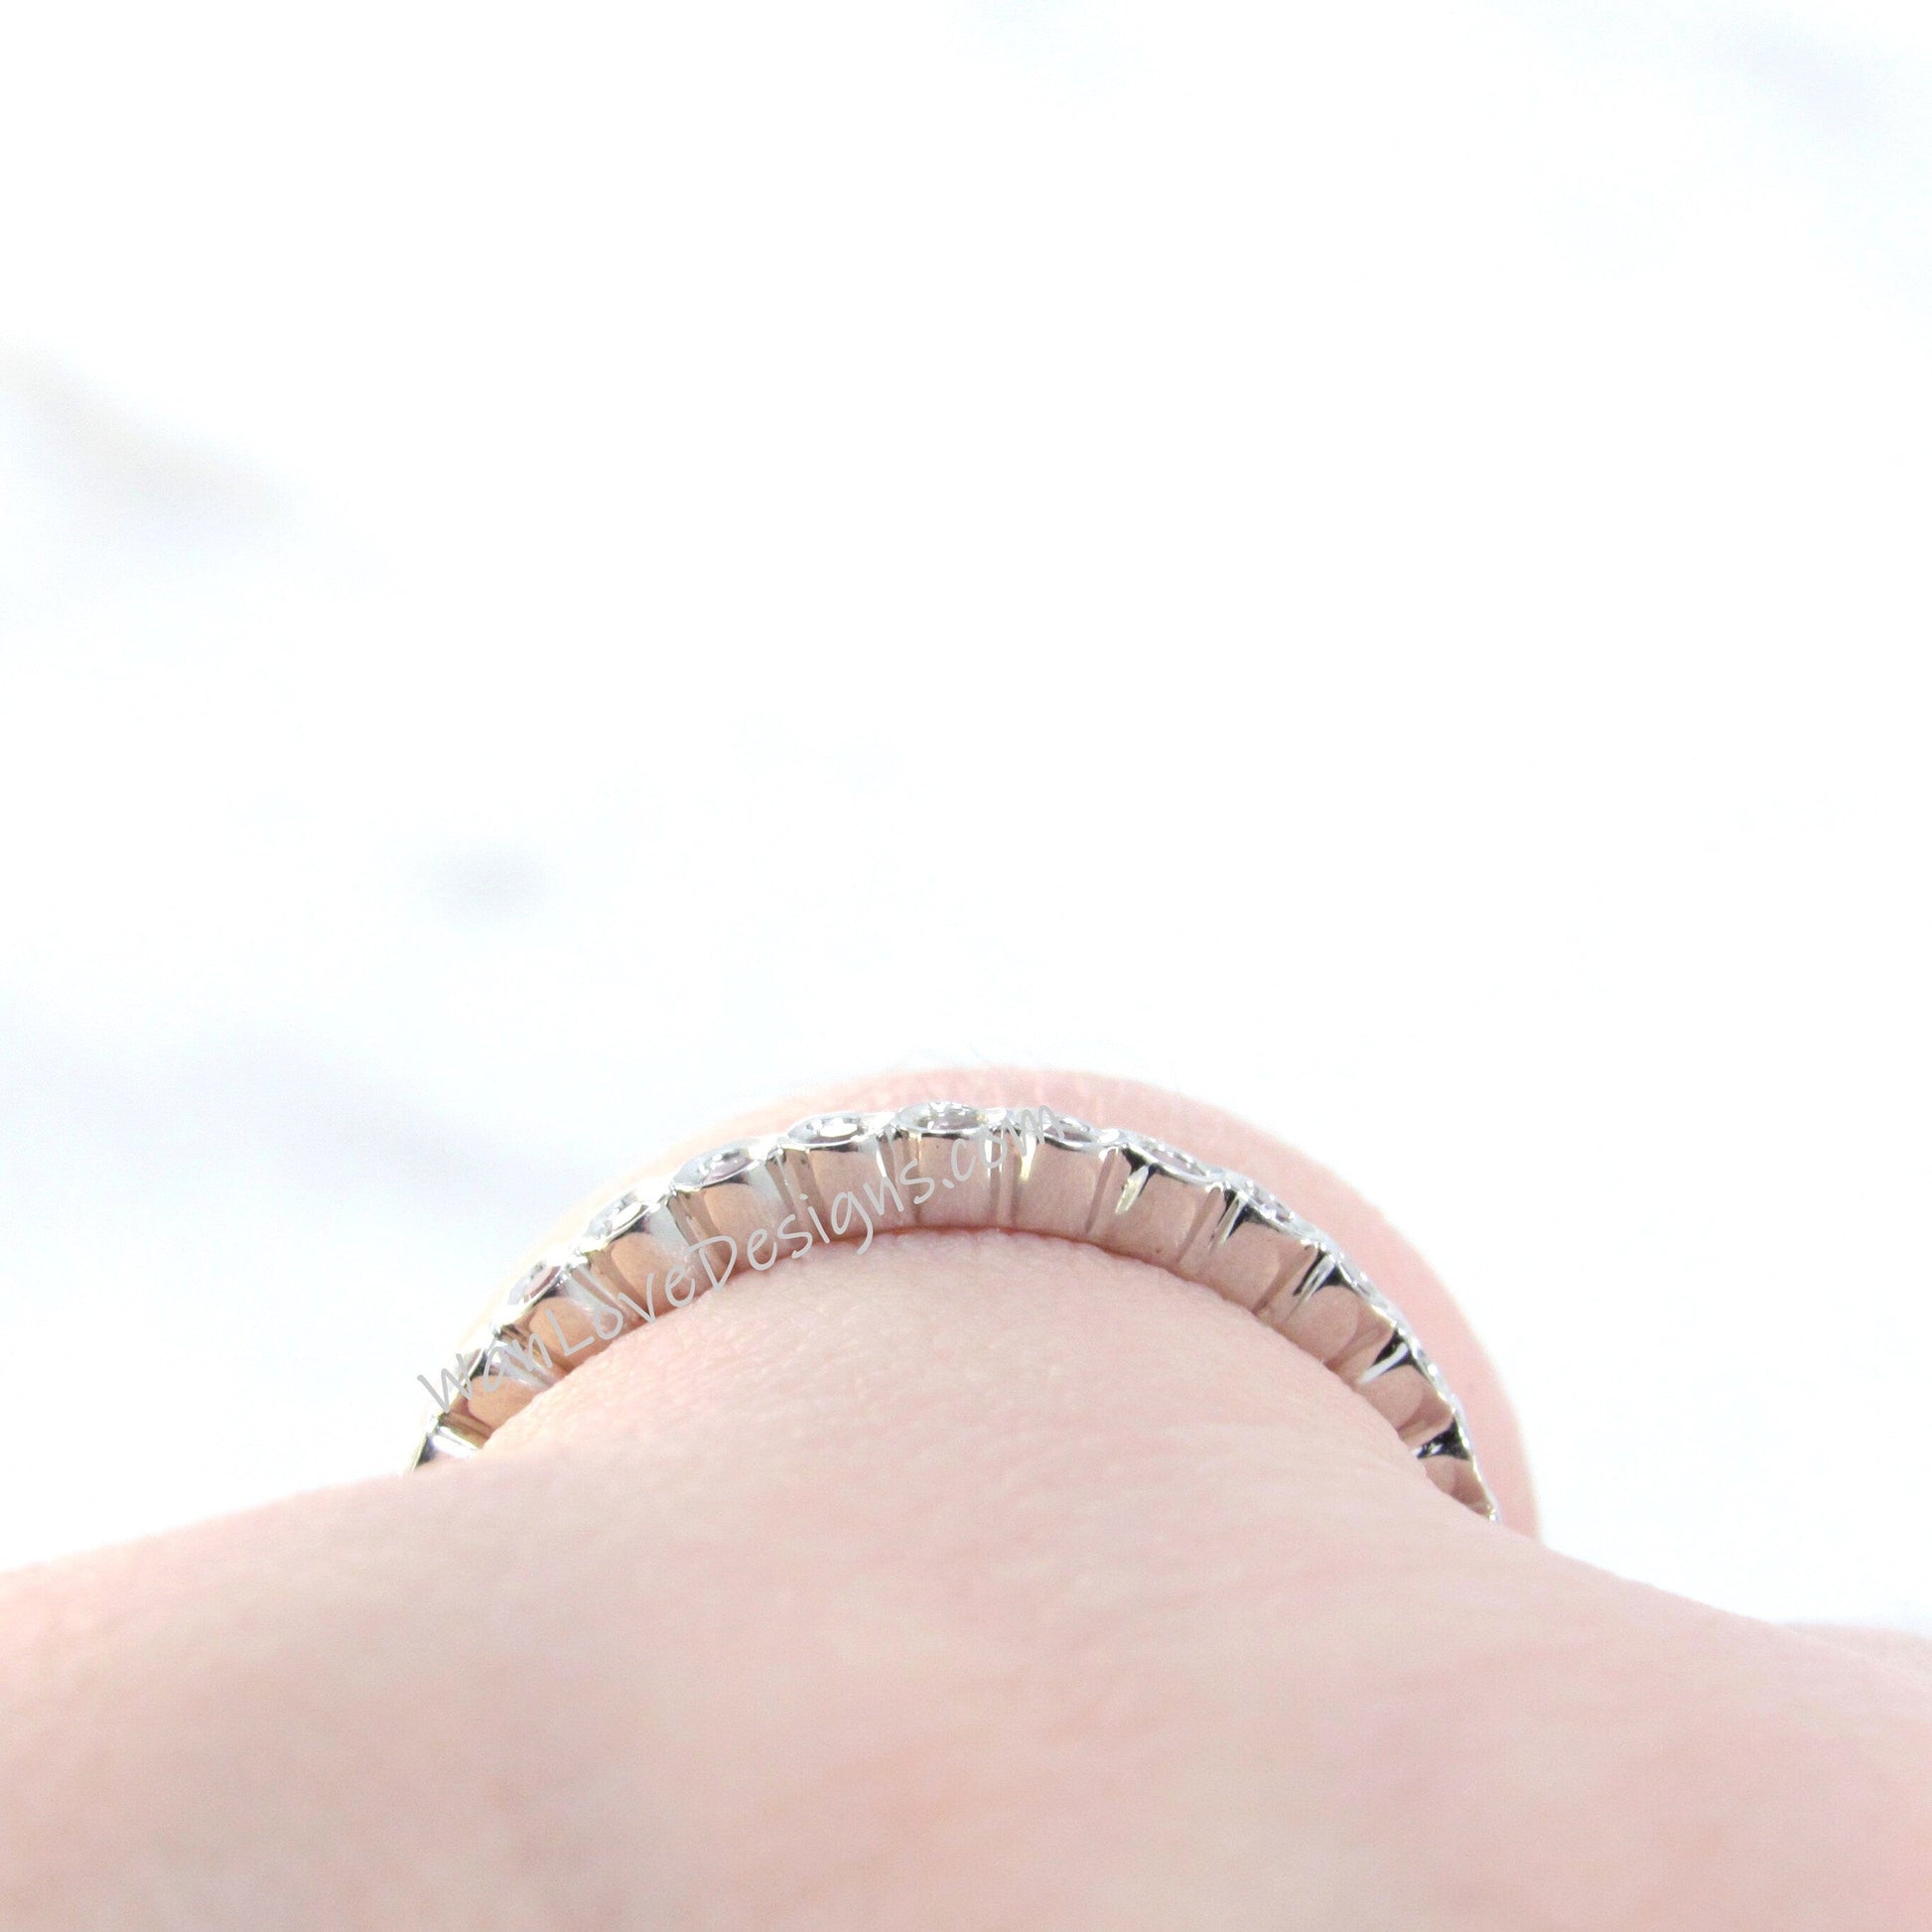 Sample Sale Ready to ship-Pink Sapphire Circle Bezel set Full Eternity Wedding Band, Stackable Ring, Engagement, Anniversary Gift Wan Love Designs